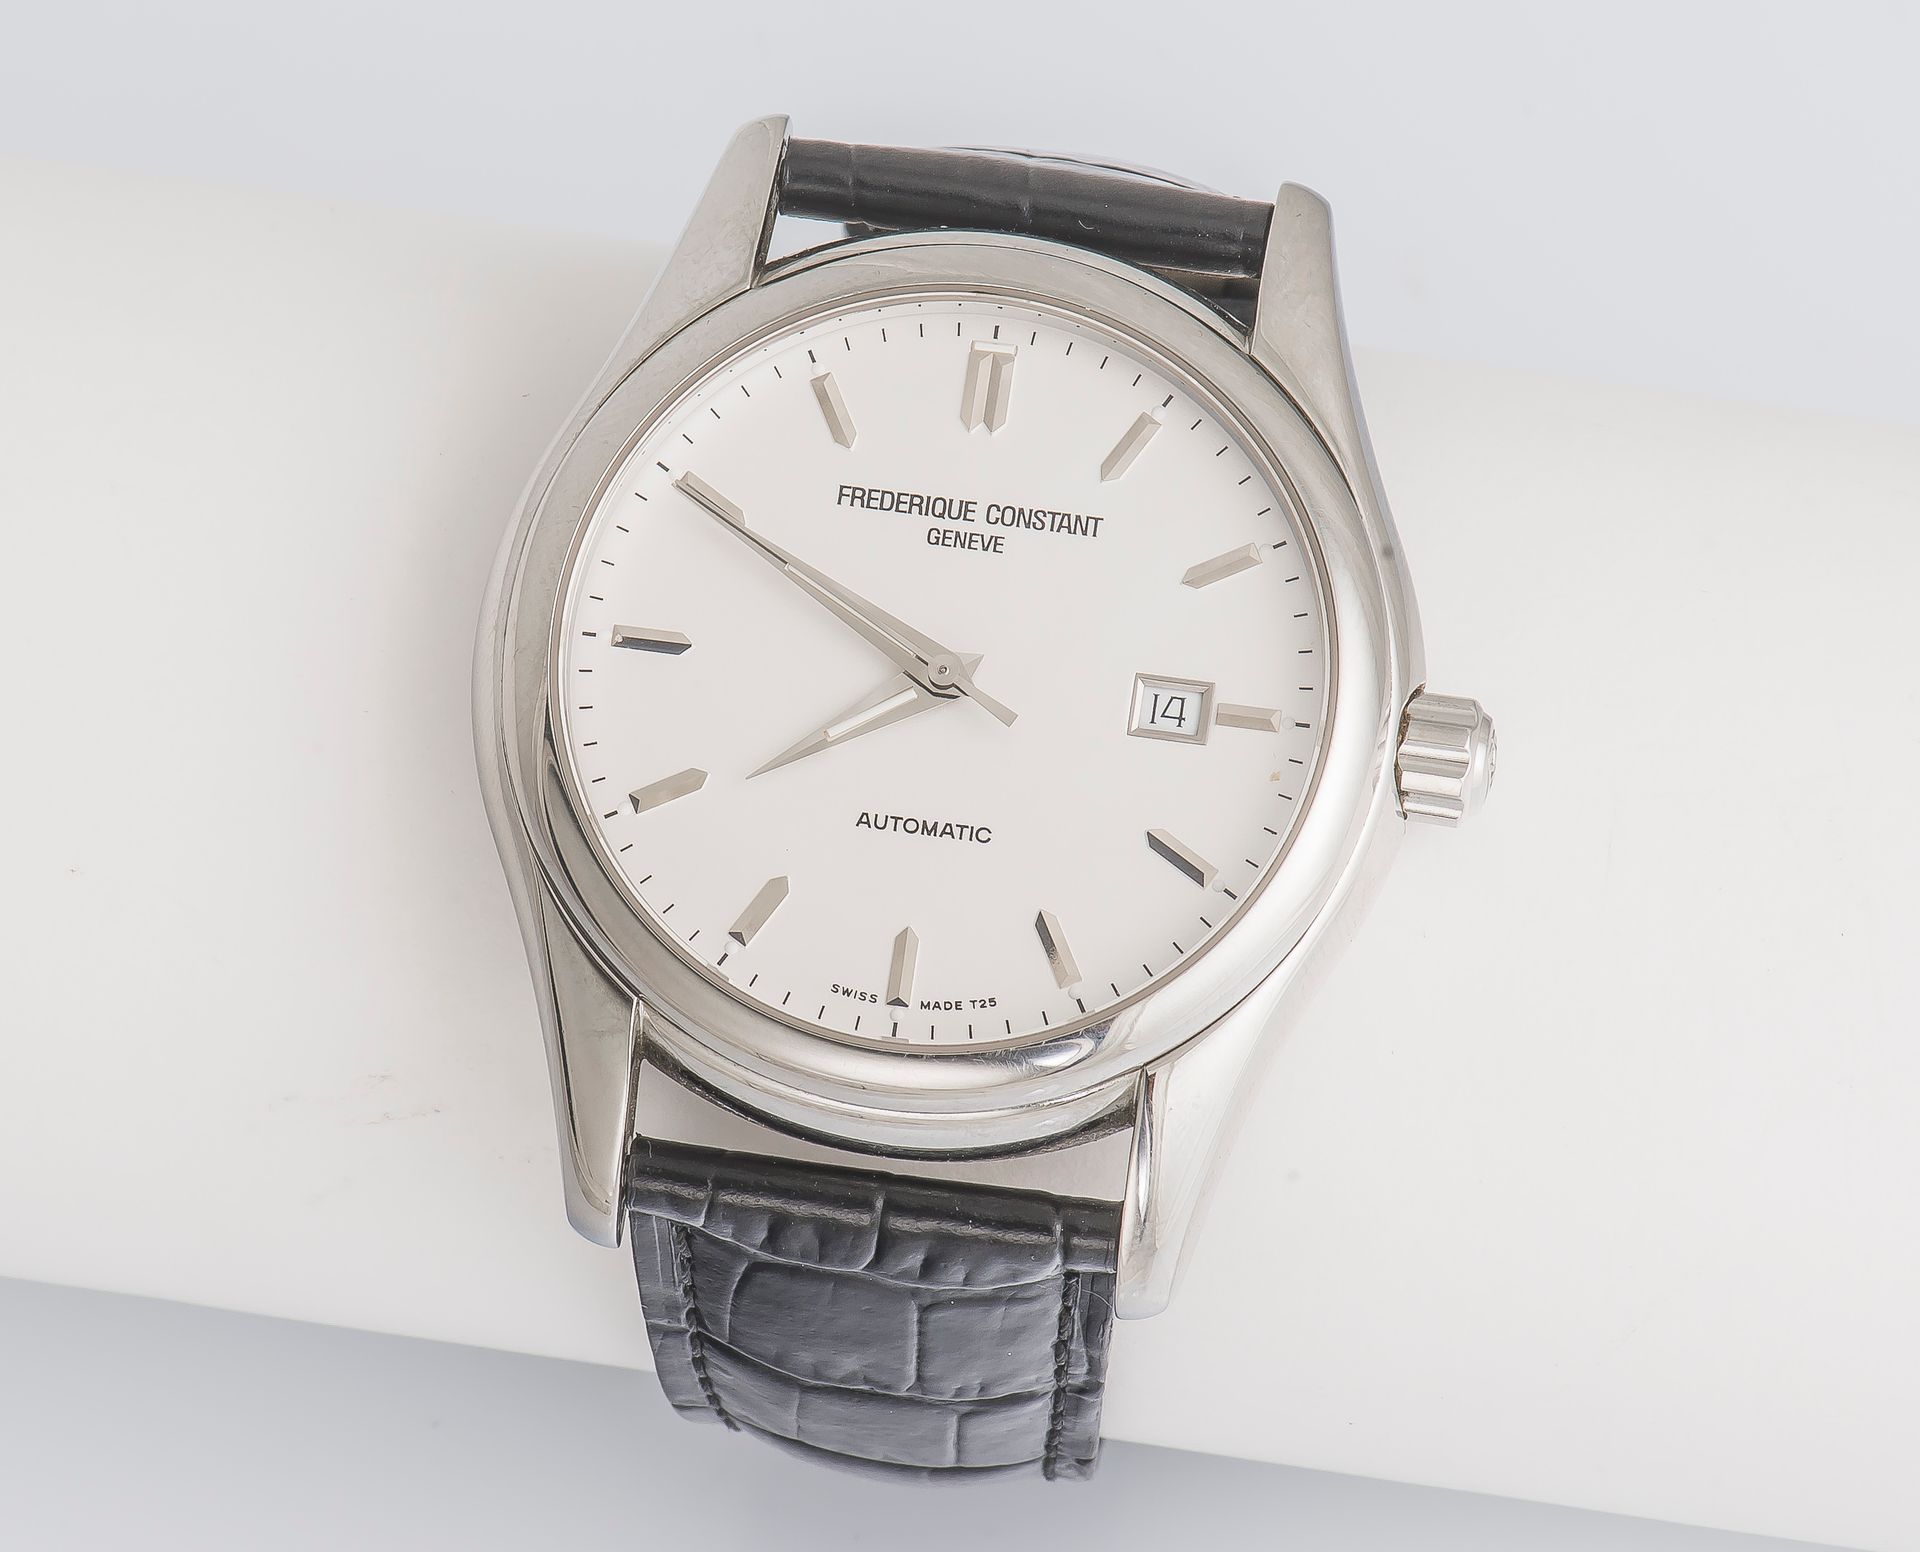 Frederique CONSTANT 2008 Classic watch ref: FC-303S6B4/6, steel case with screwe&hellip;